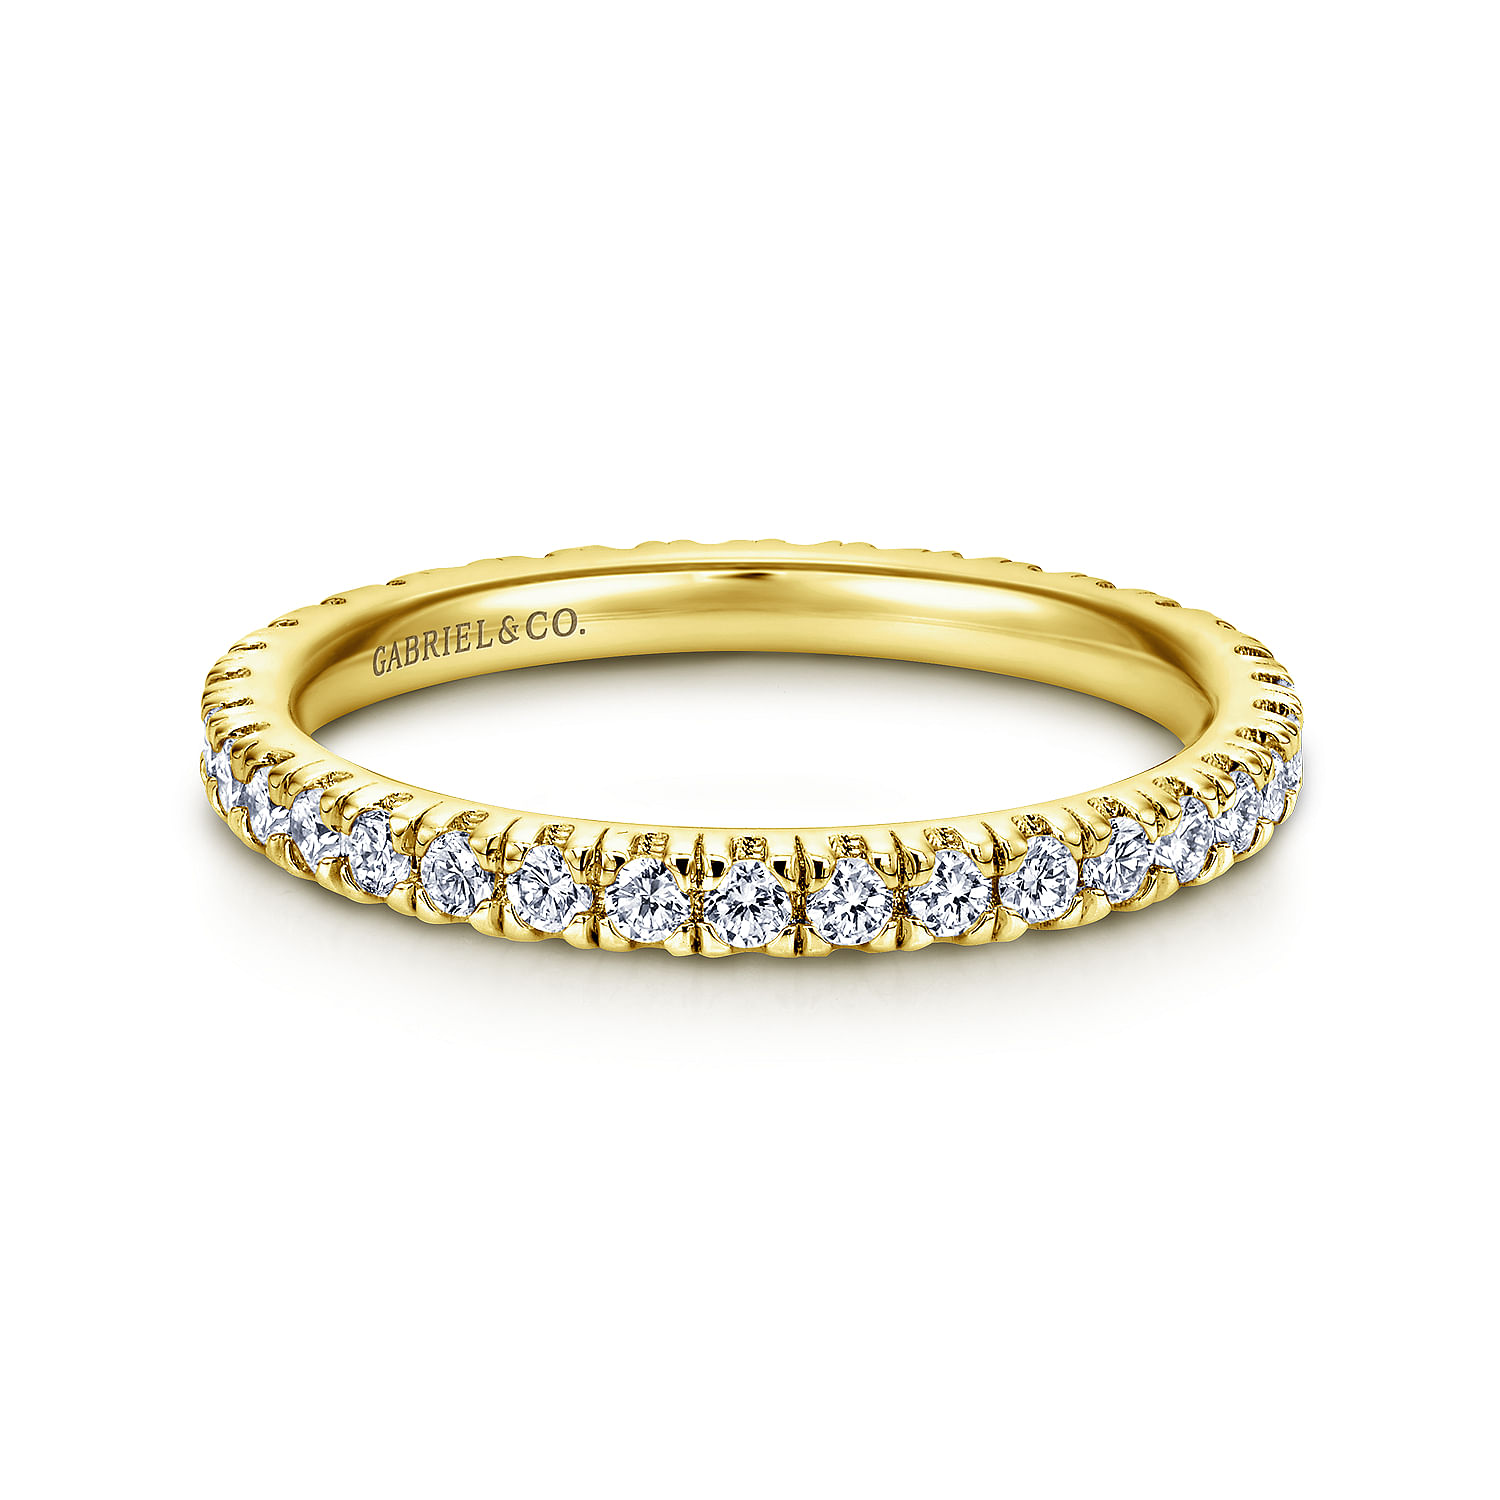 Avignon - French Pave  Eternity Diamond Ring in 14K Yellow Gold